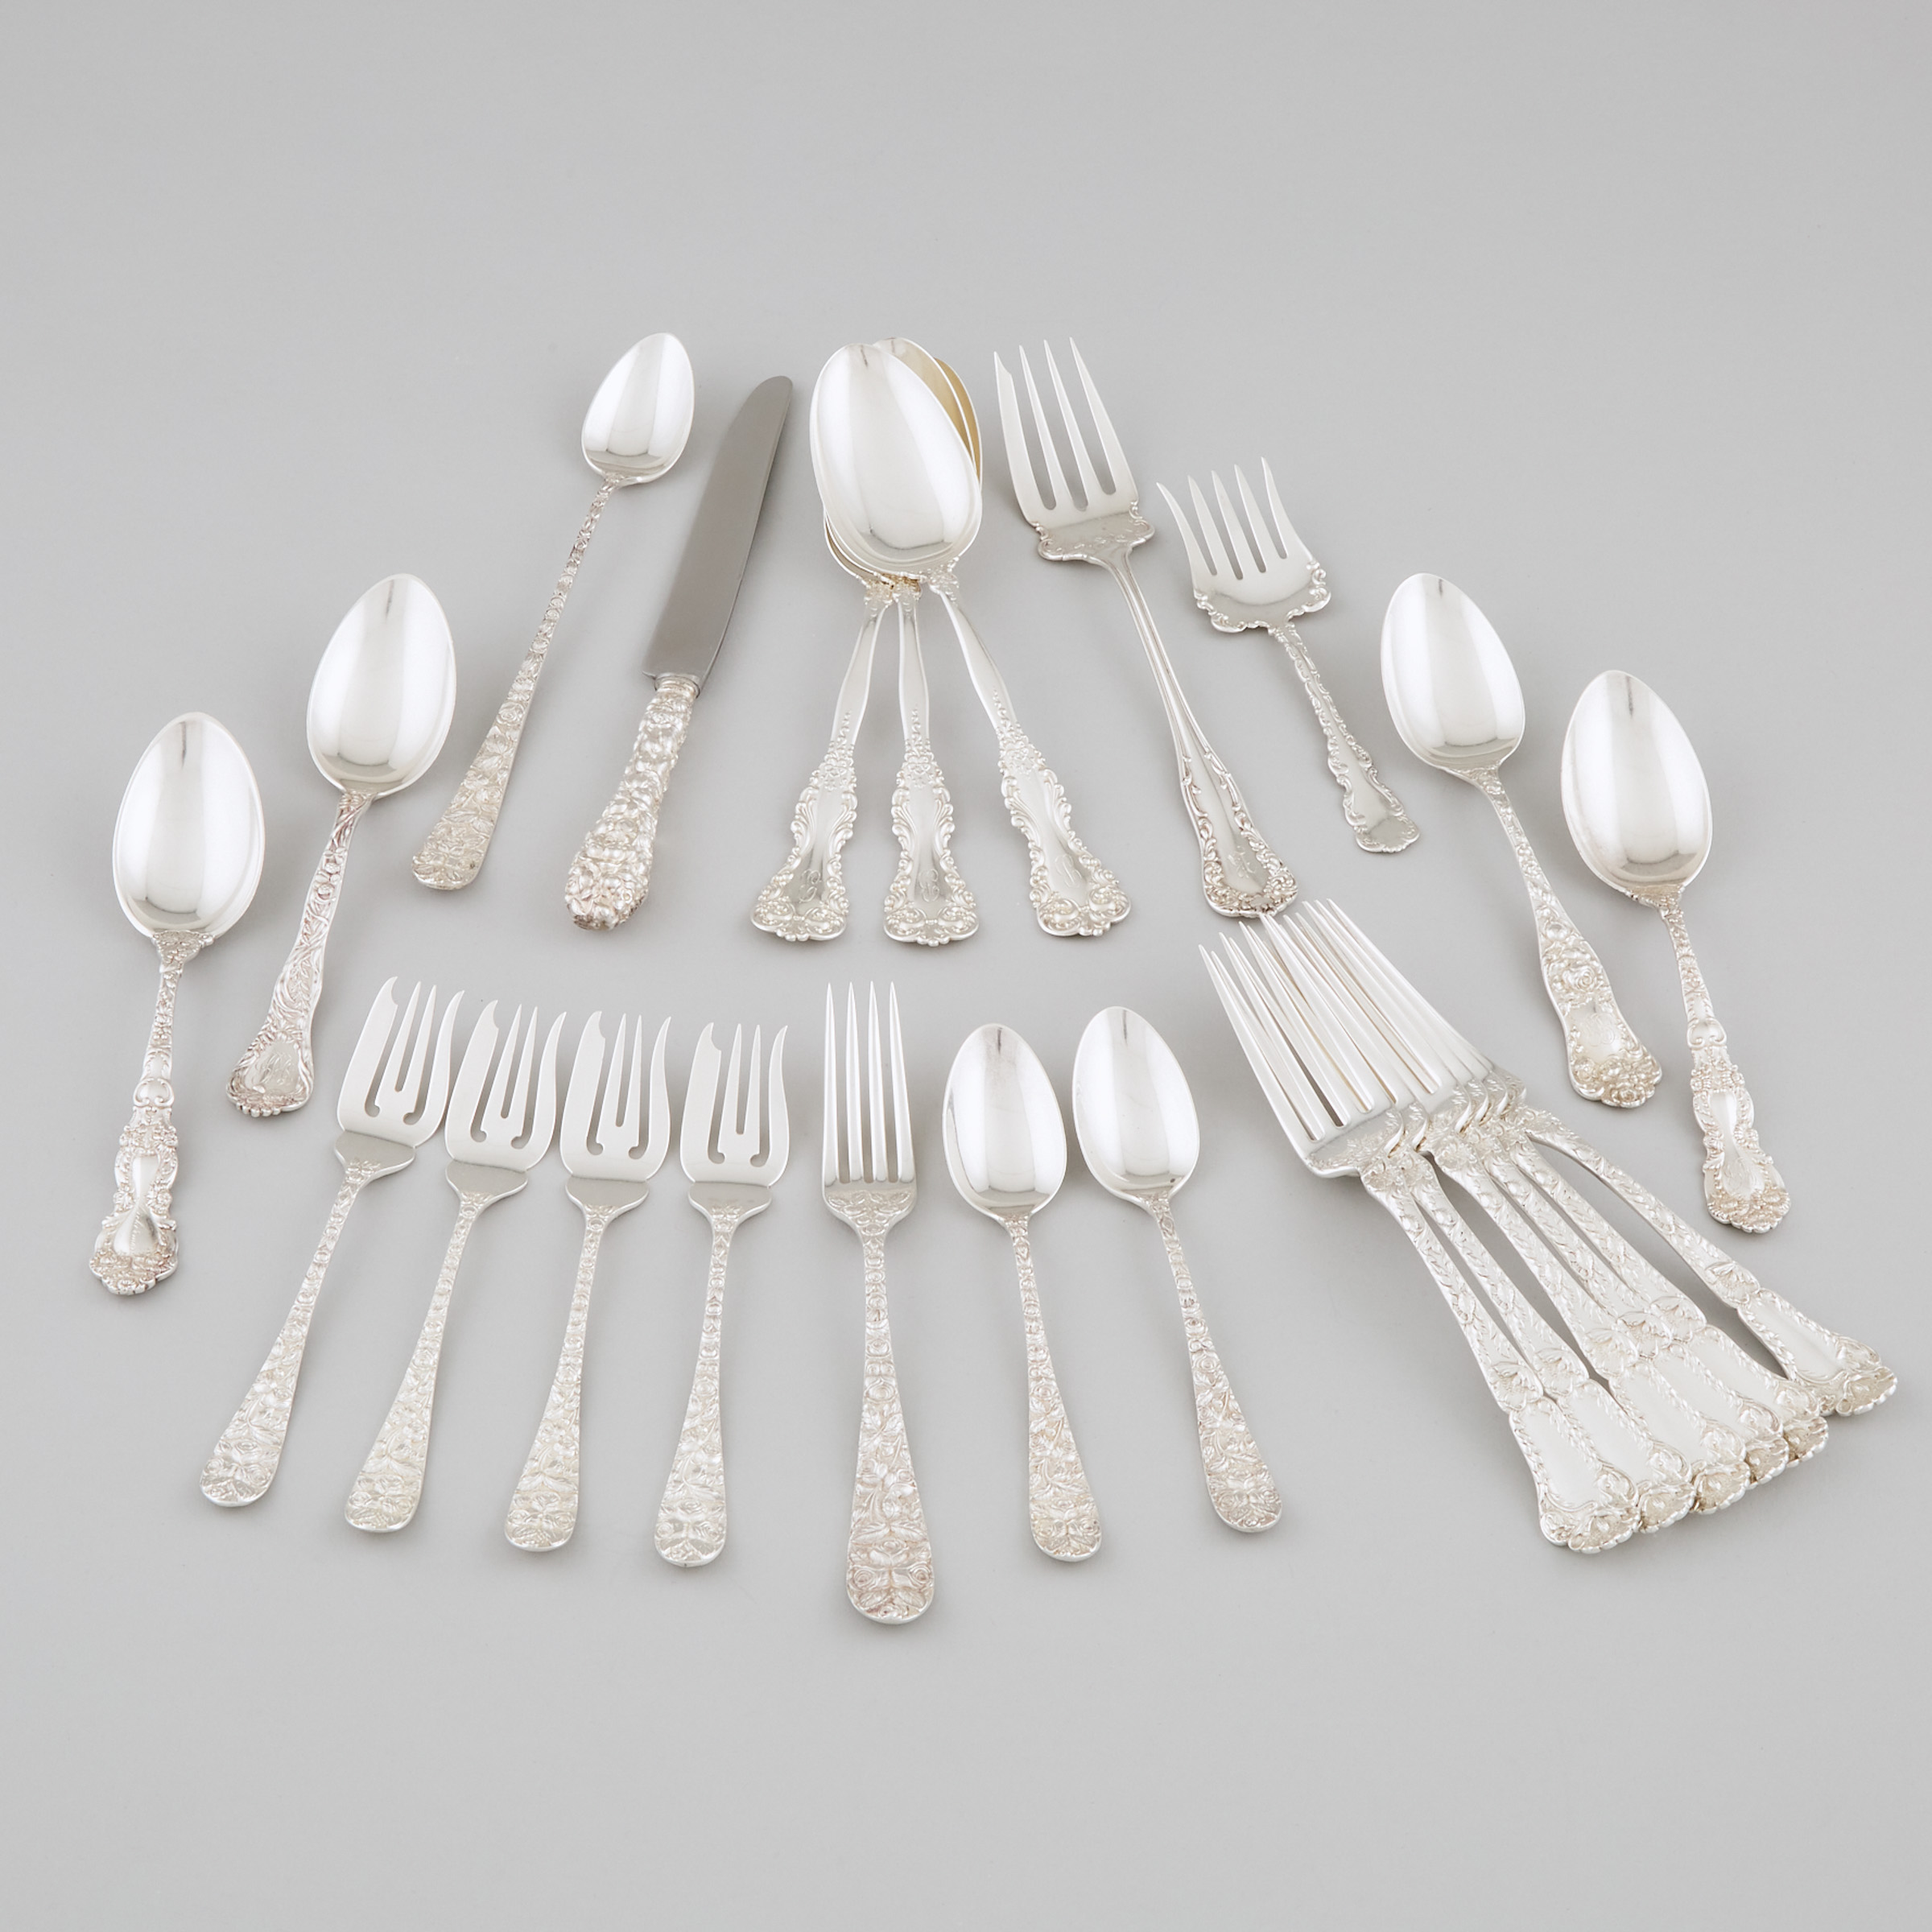 Group of American Silver Flatware, late 19th/early 20th century